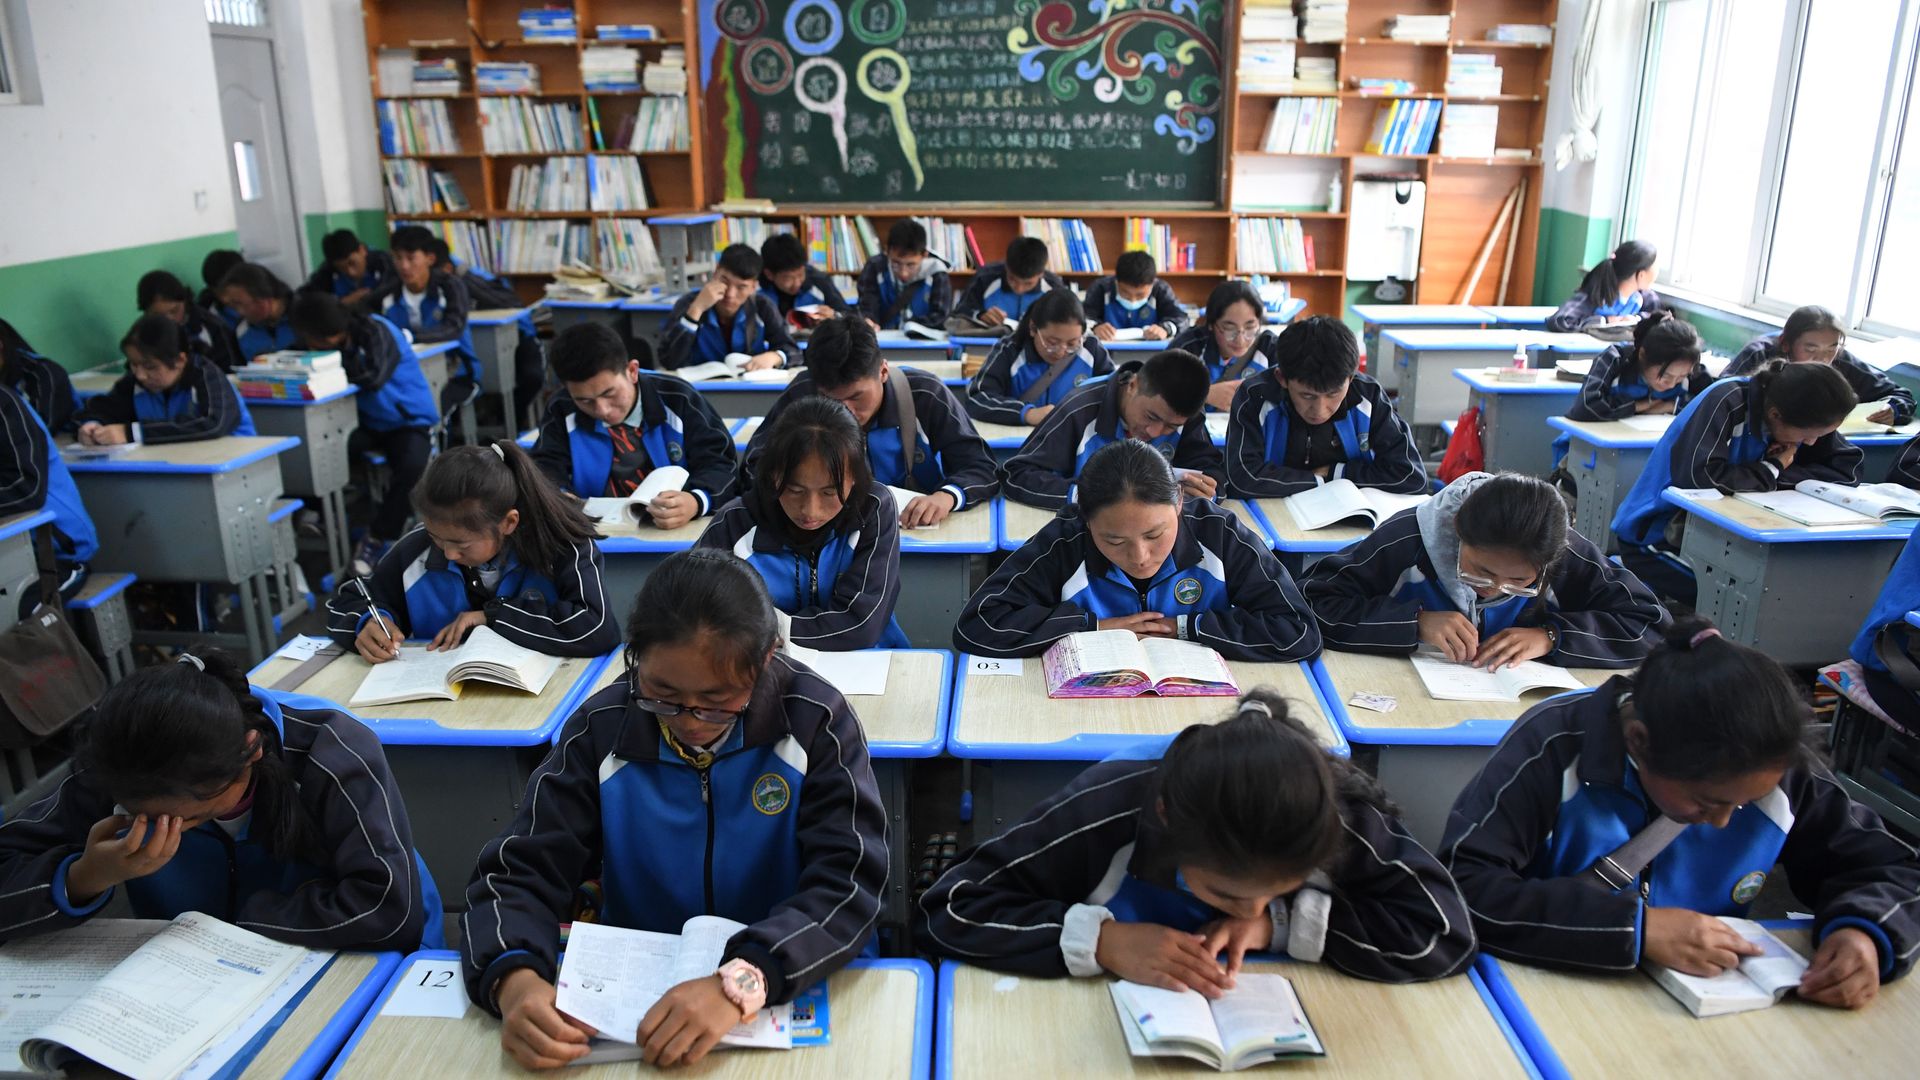 Students read books in a classroom at a middle school in Gansu province.